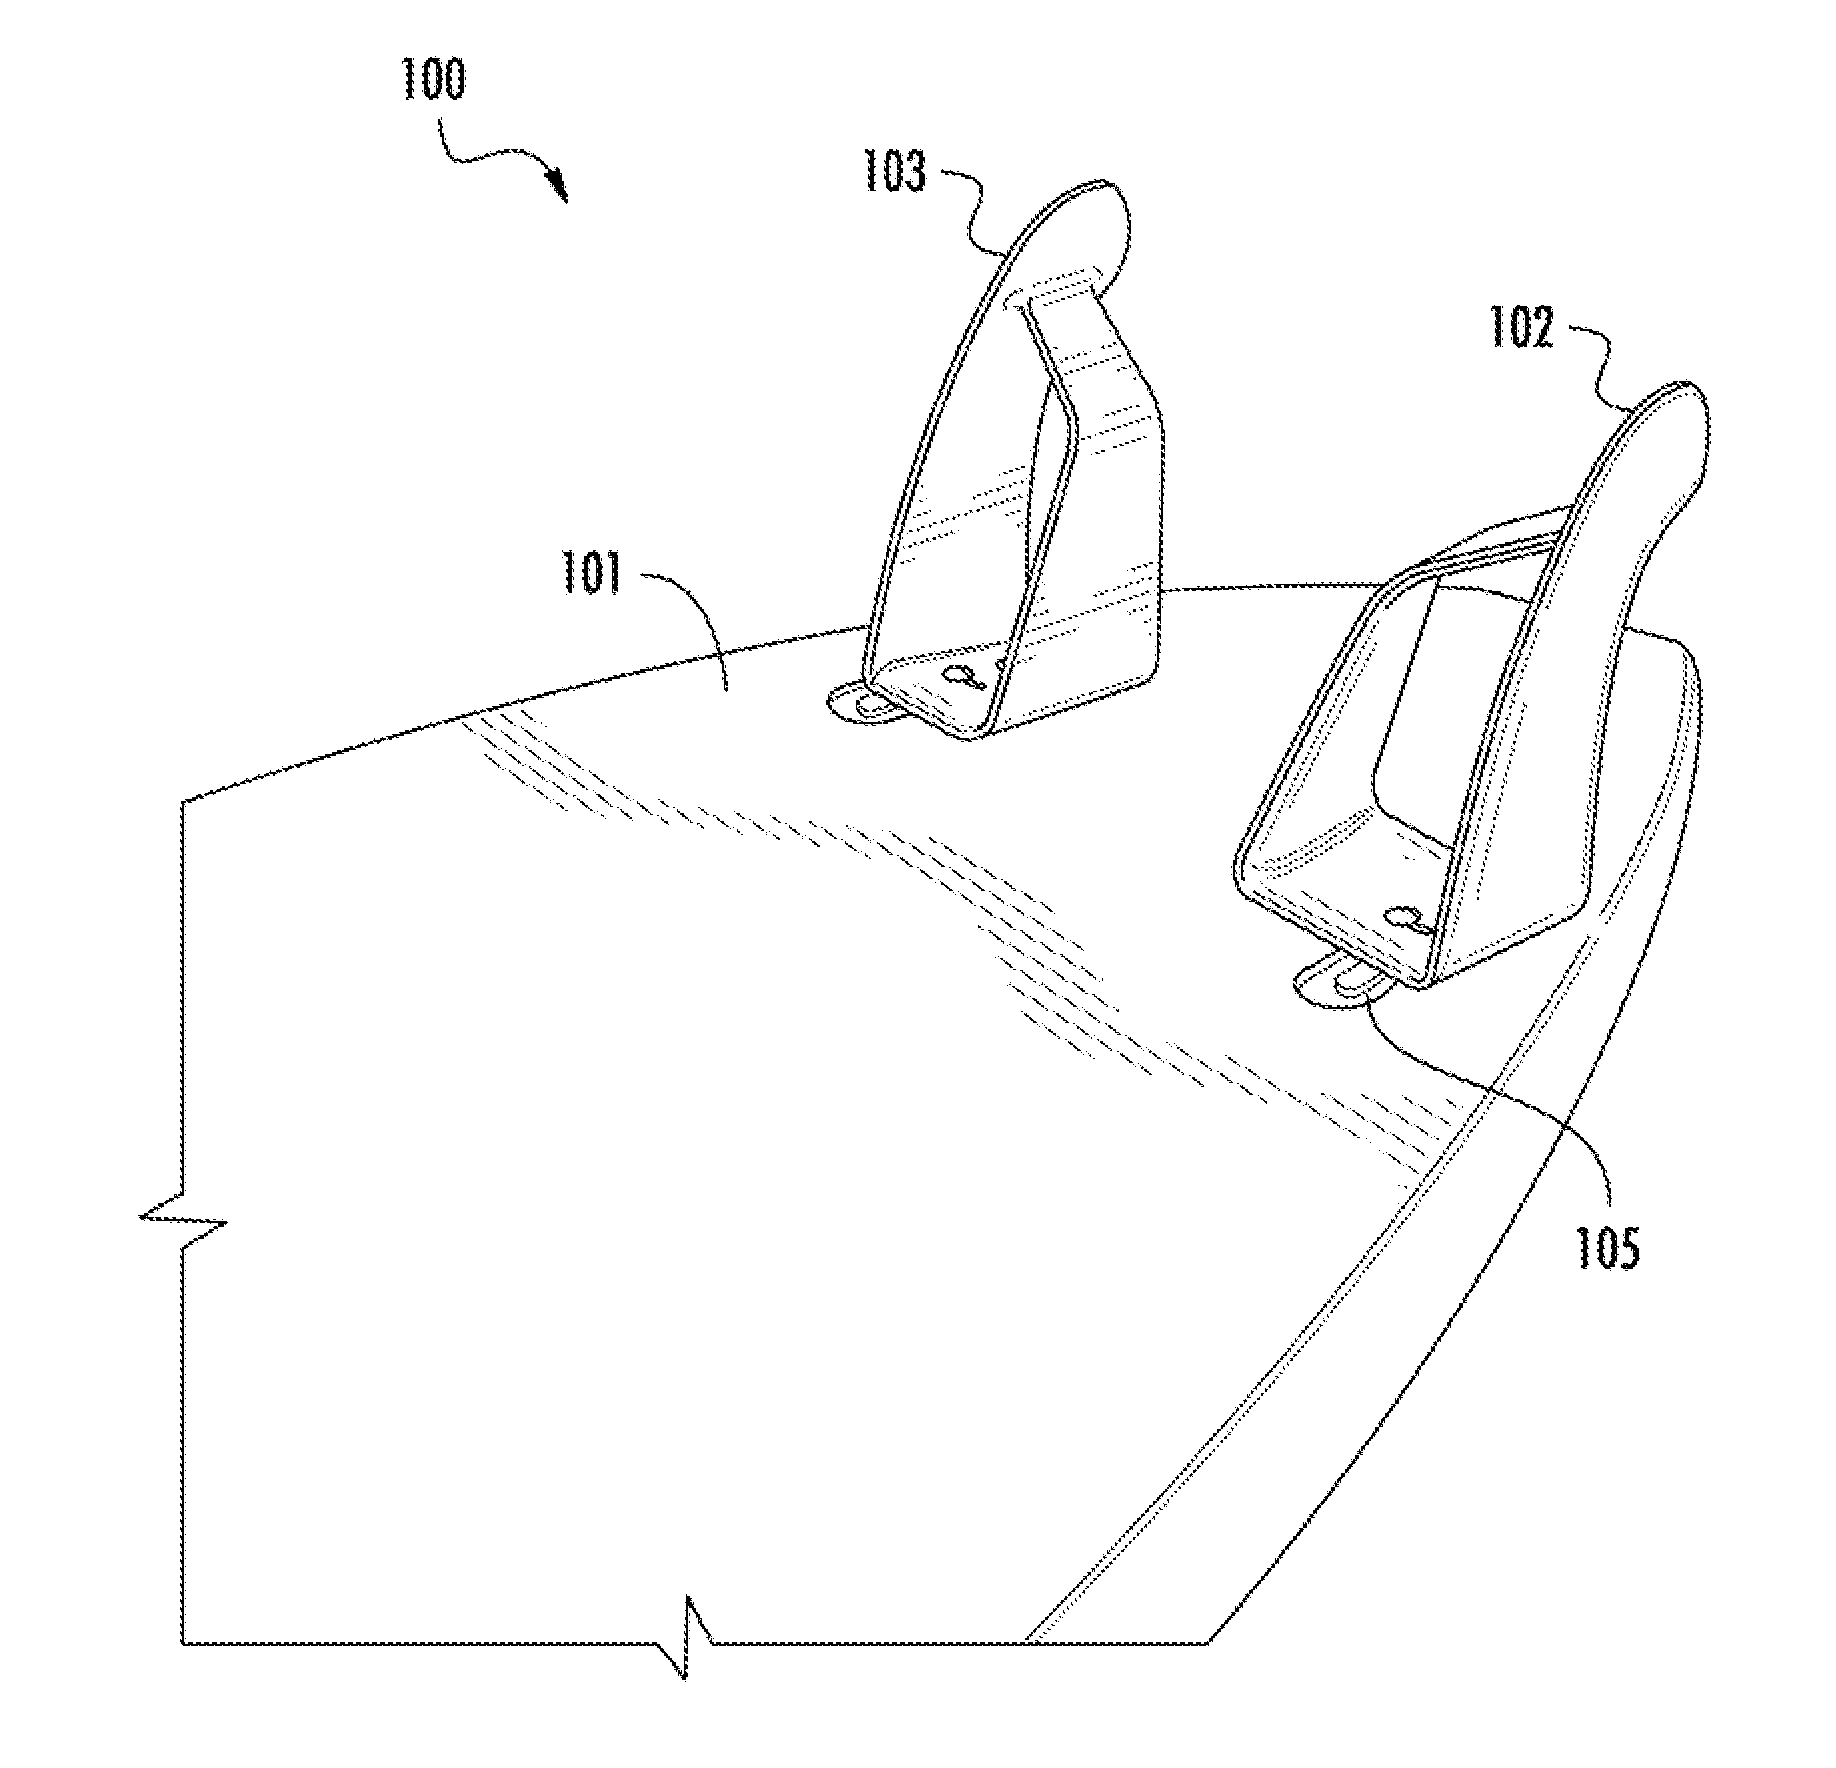 Surfboard Fin for Generating Surfboard Lift and Method of Use